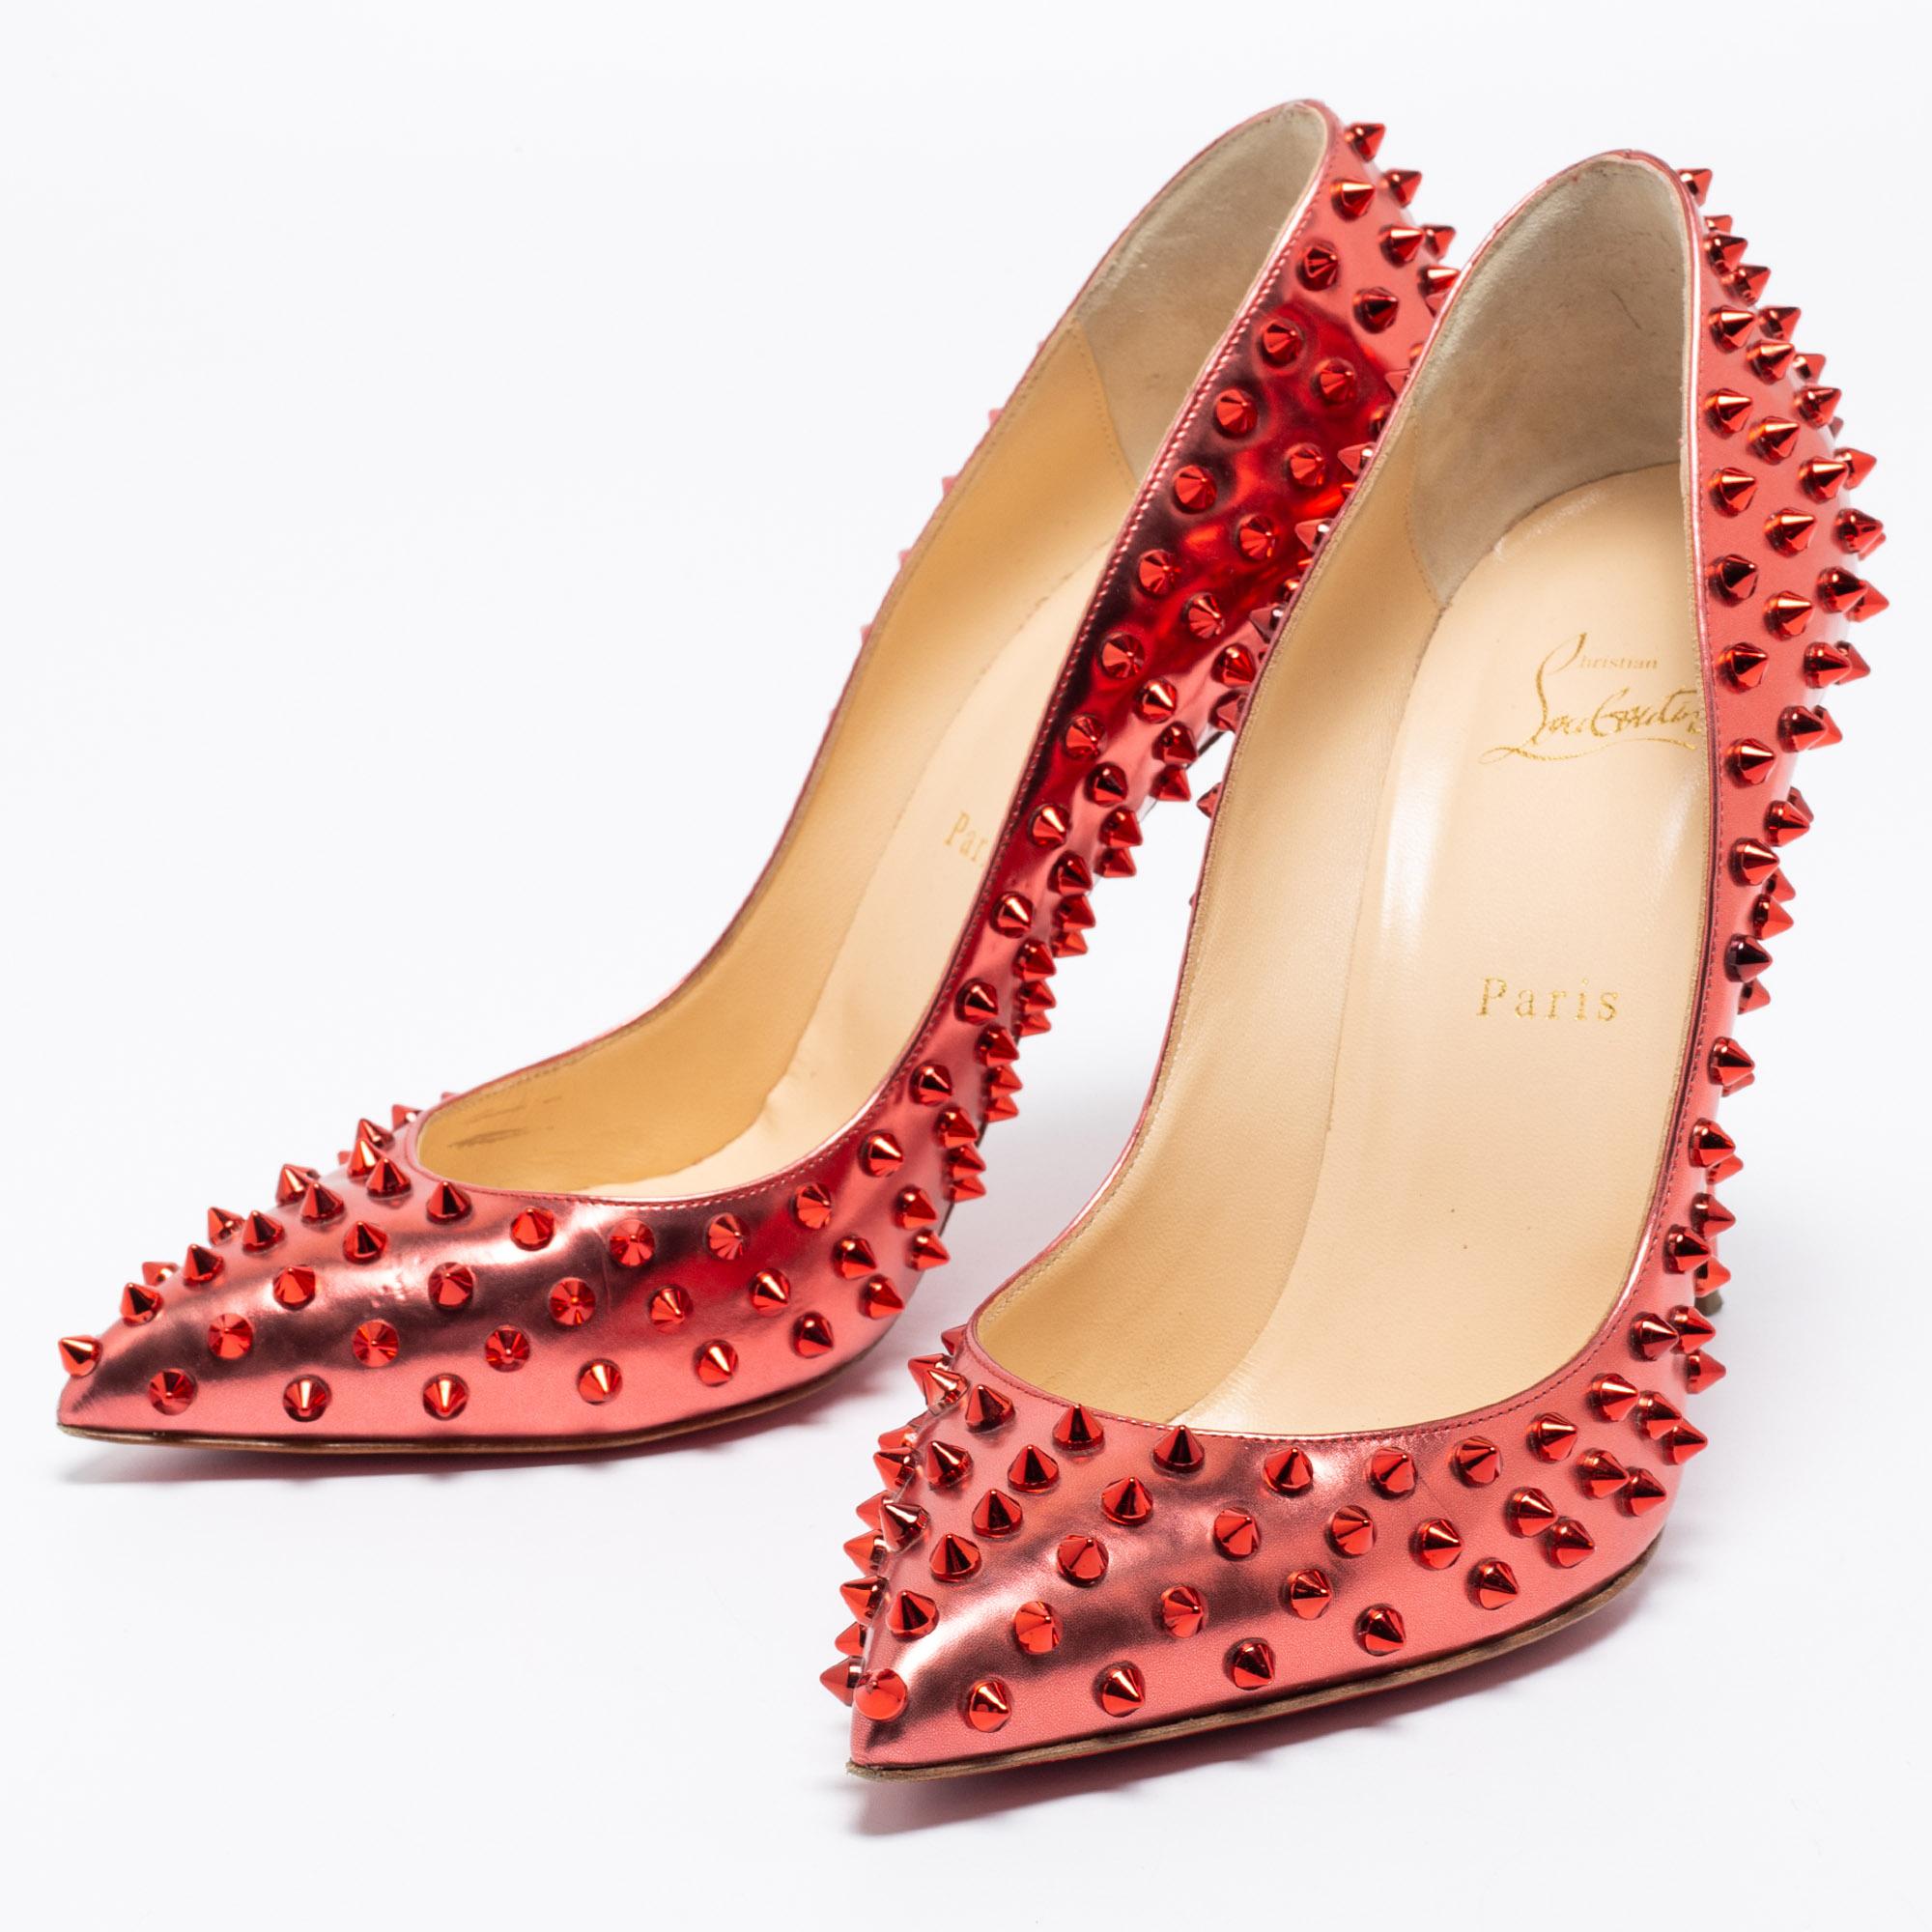 Dazzle everyone with these Louboutins by owning them today. Crafted from red leather, these CL pumps carry a mesmerizing shape with pointed toes, spike embellishments on the exterior, and high heels. Complete with the signature red soles, this pair